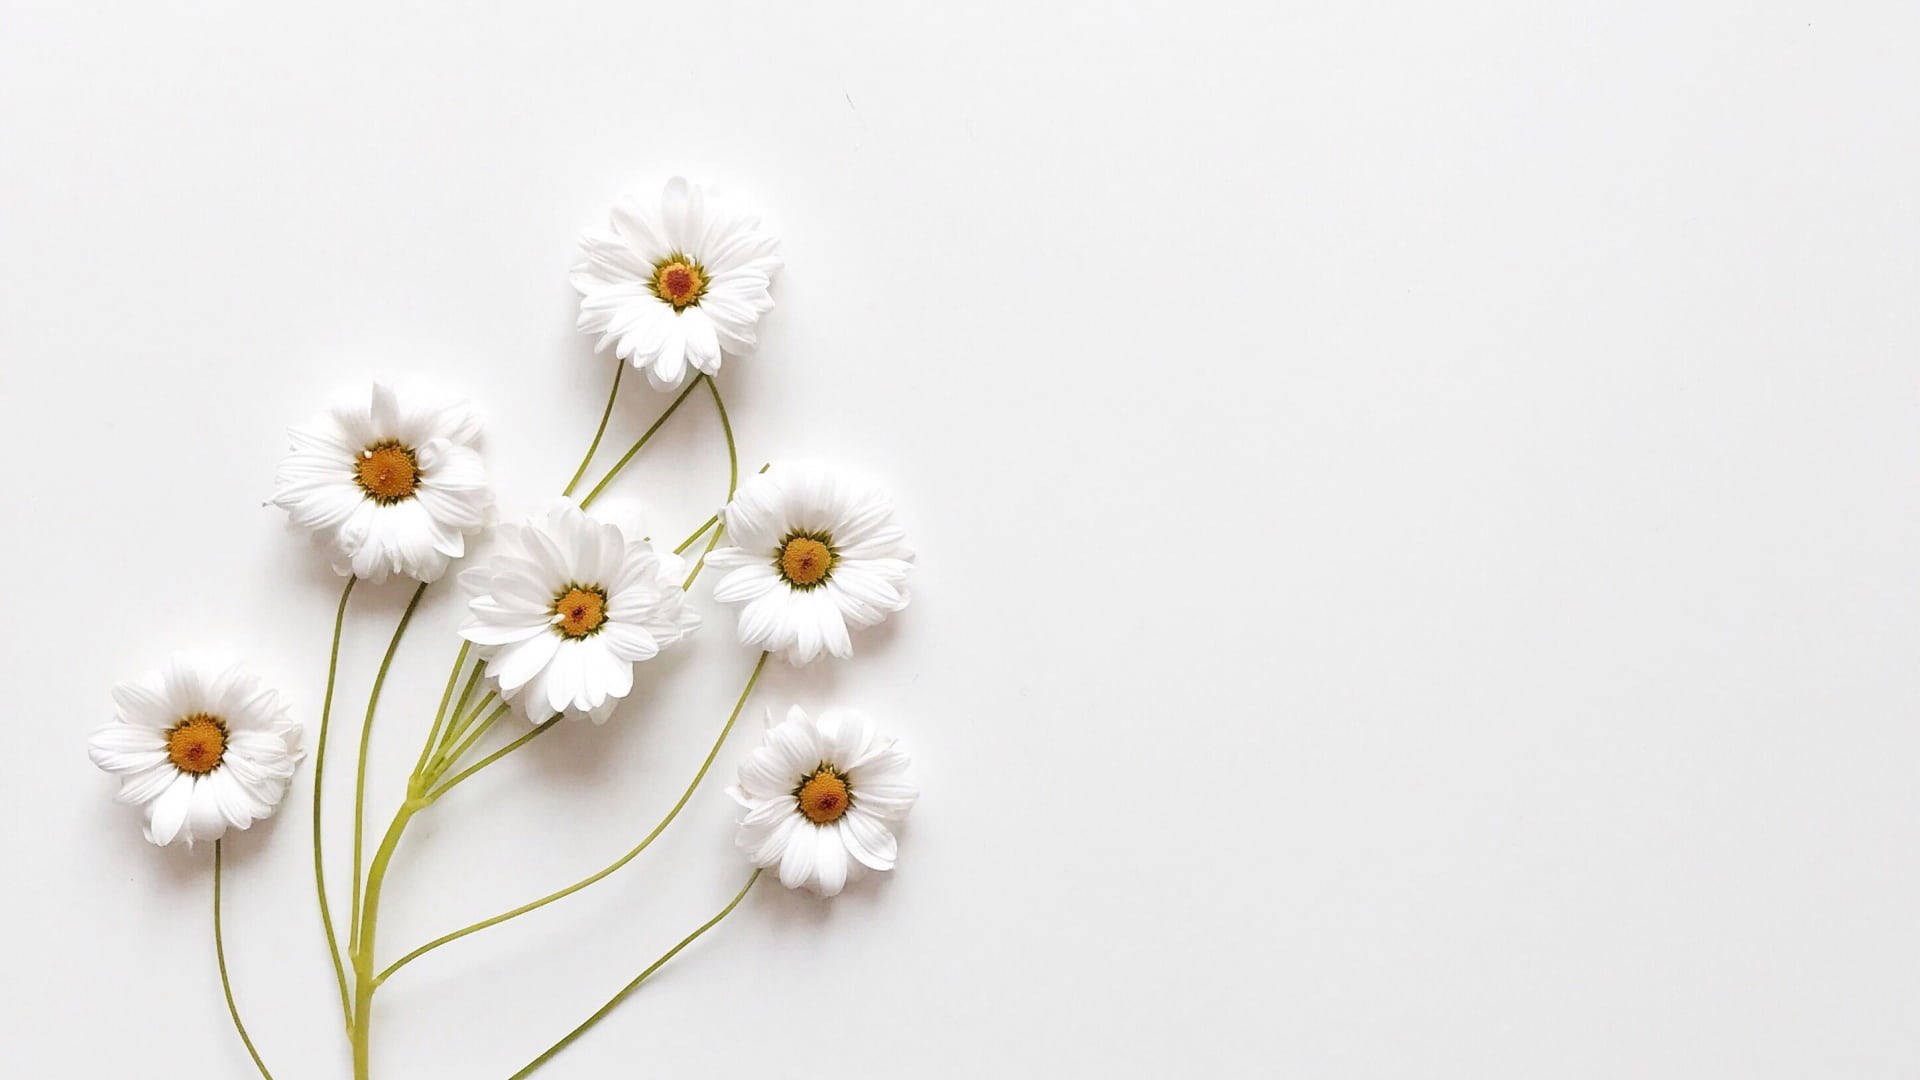 Cute White Aesthetic Of A Common Daisy